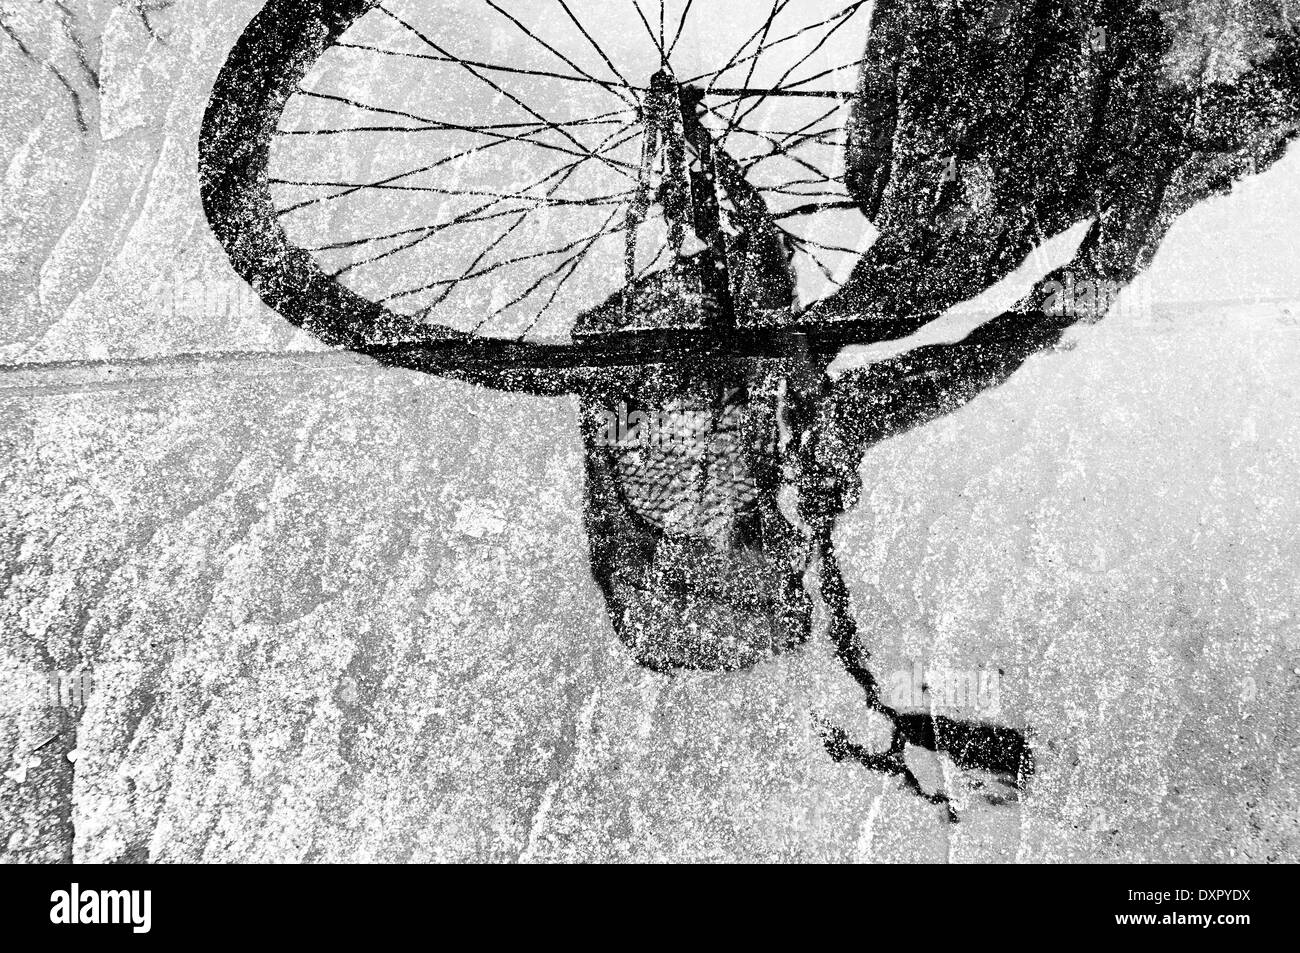 reflection of bicycle on puddle. Black and white Stock Photo